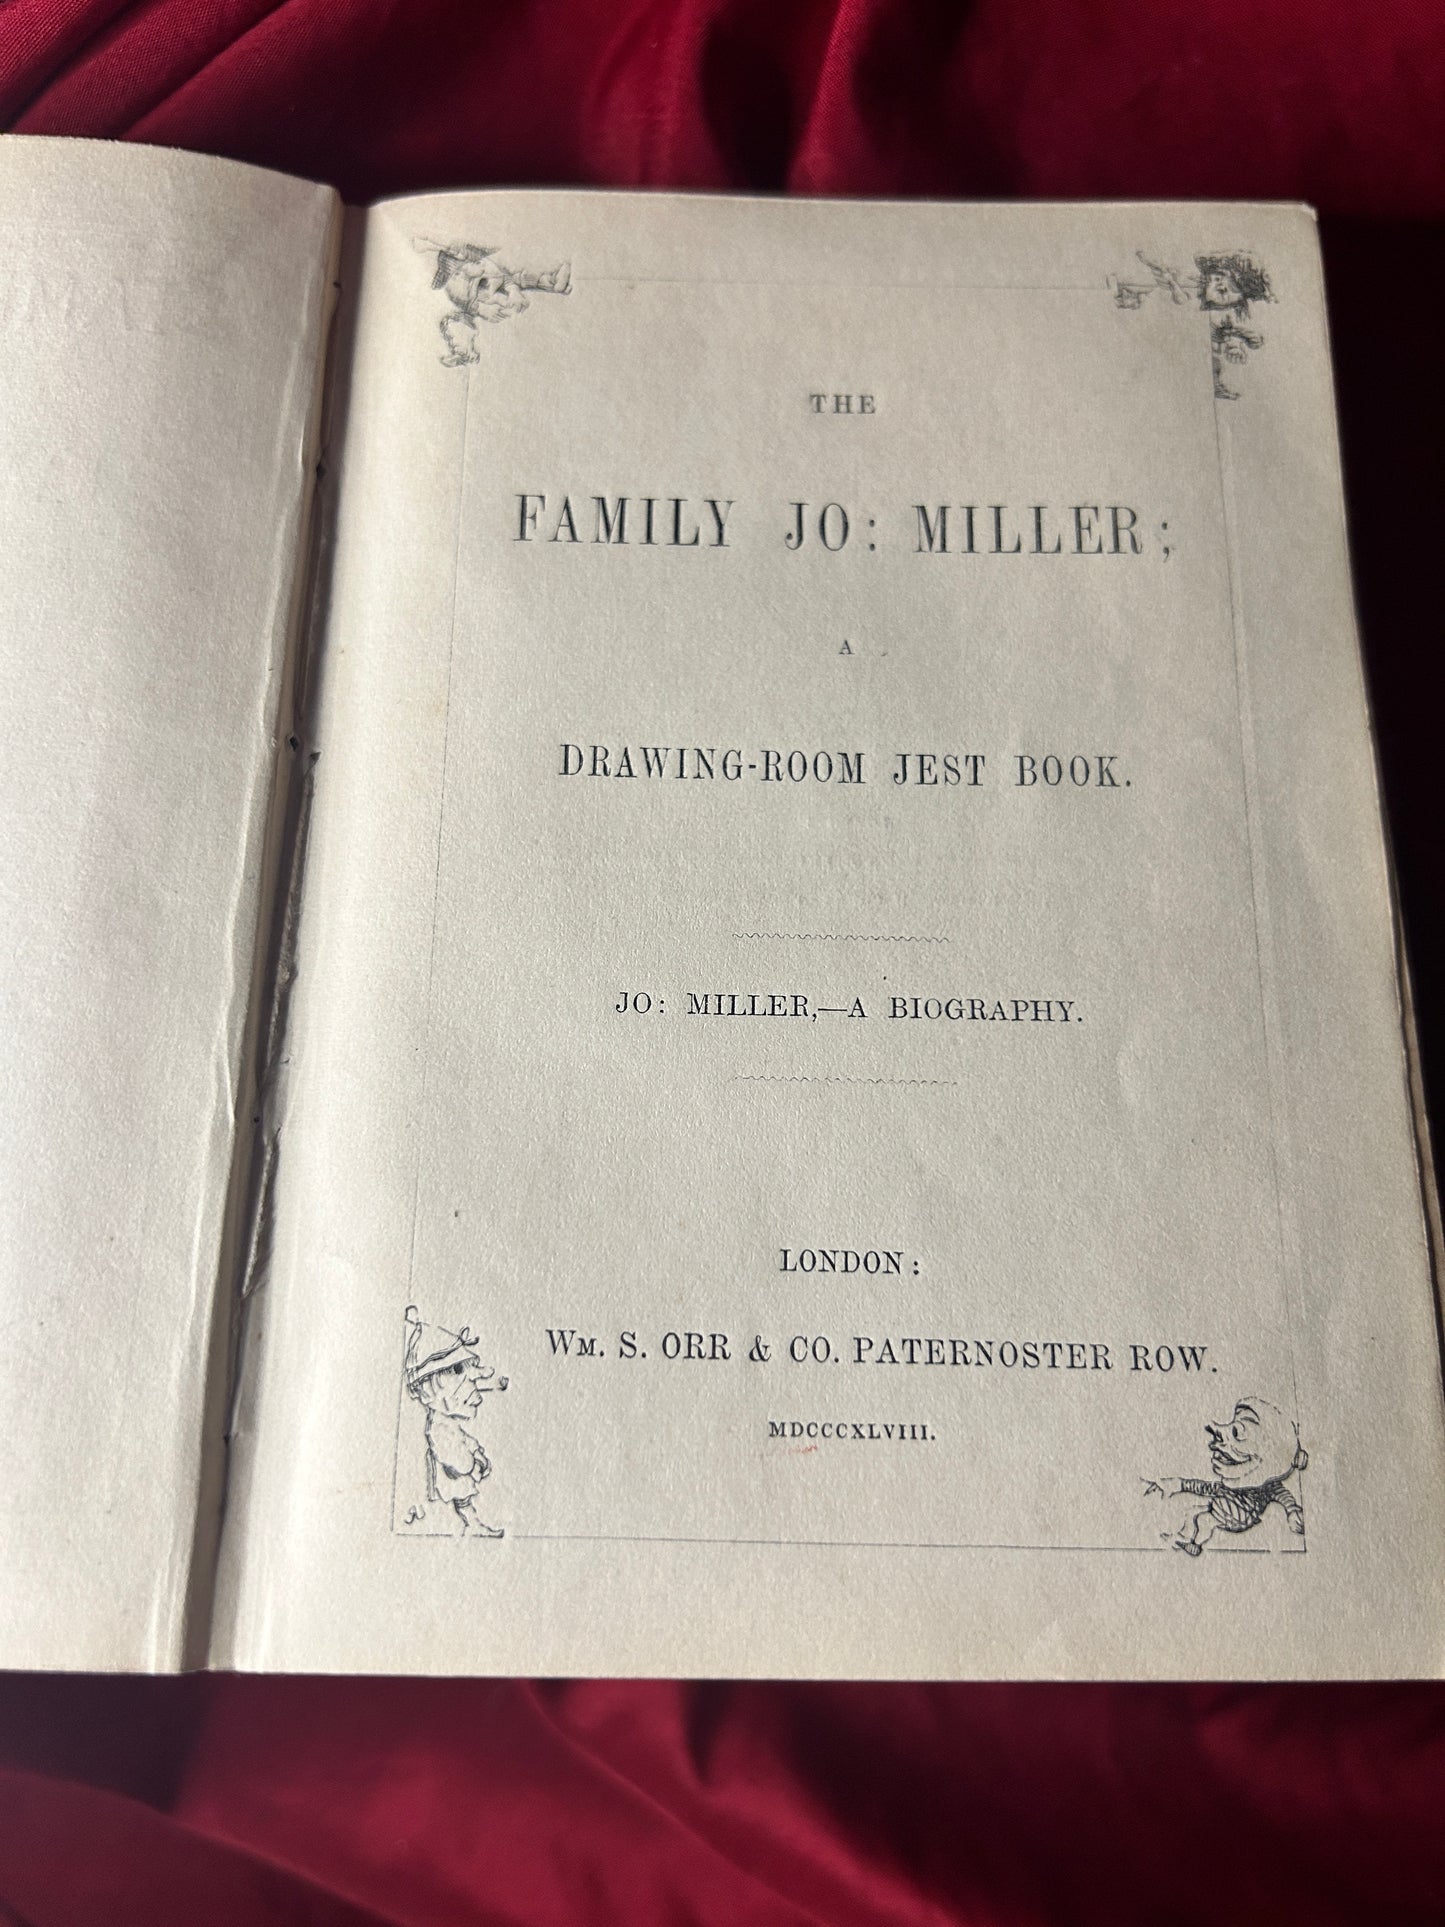 The Family Jo: Miller; A Drawing Room Jest Book